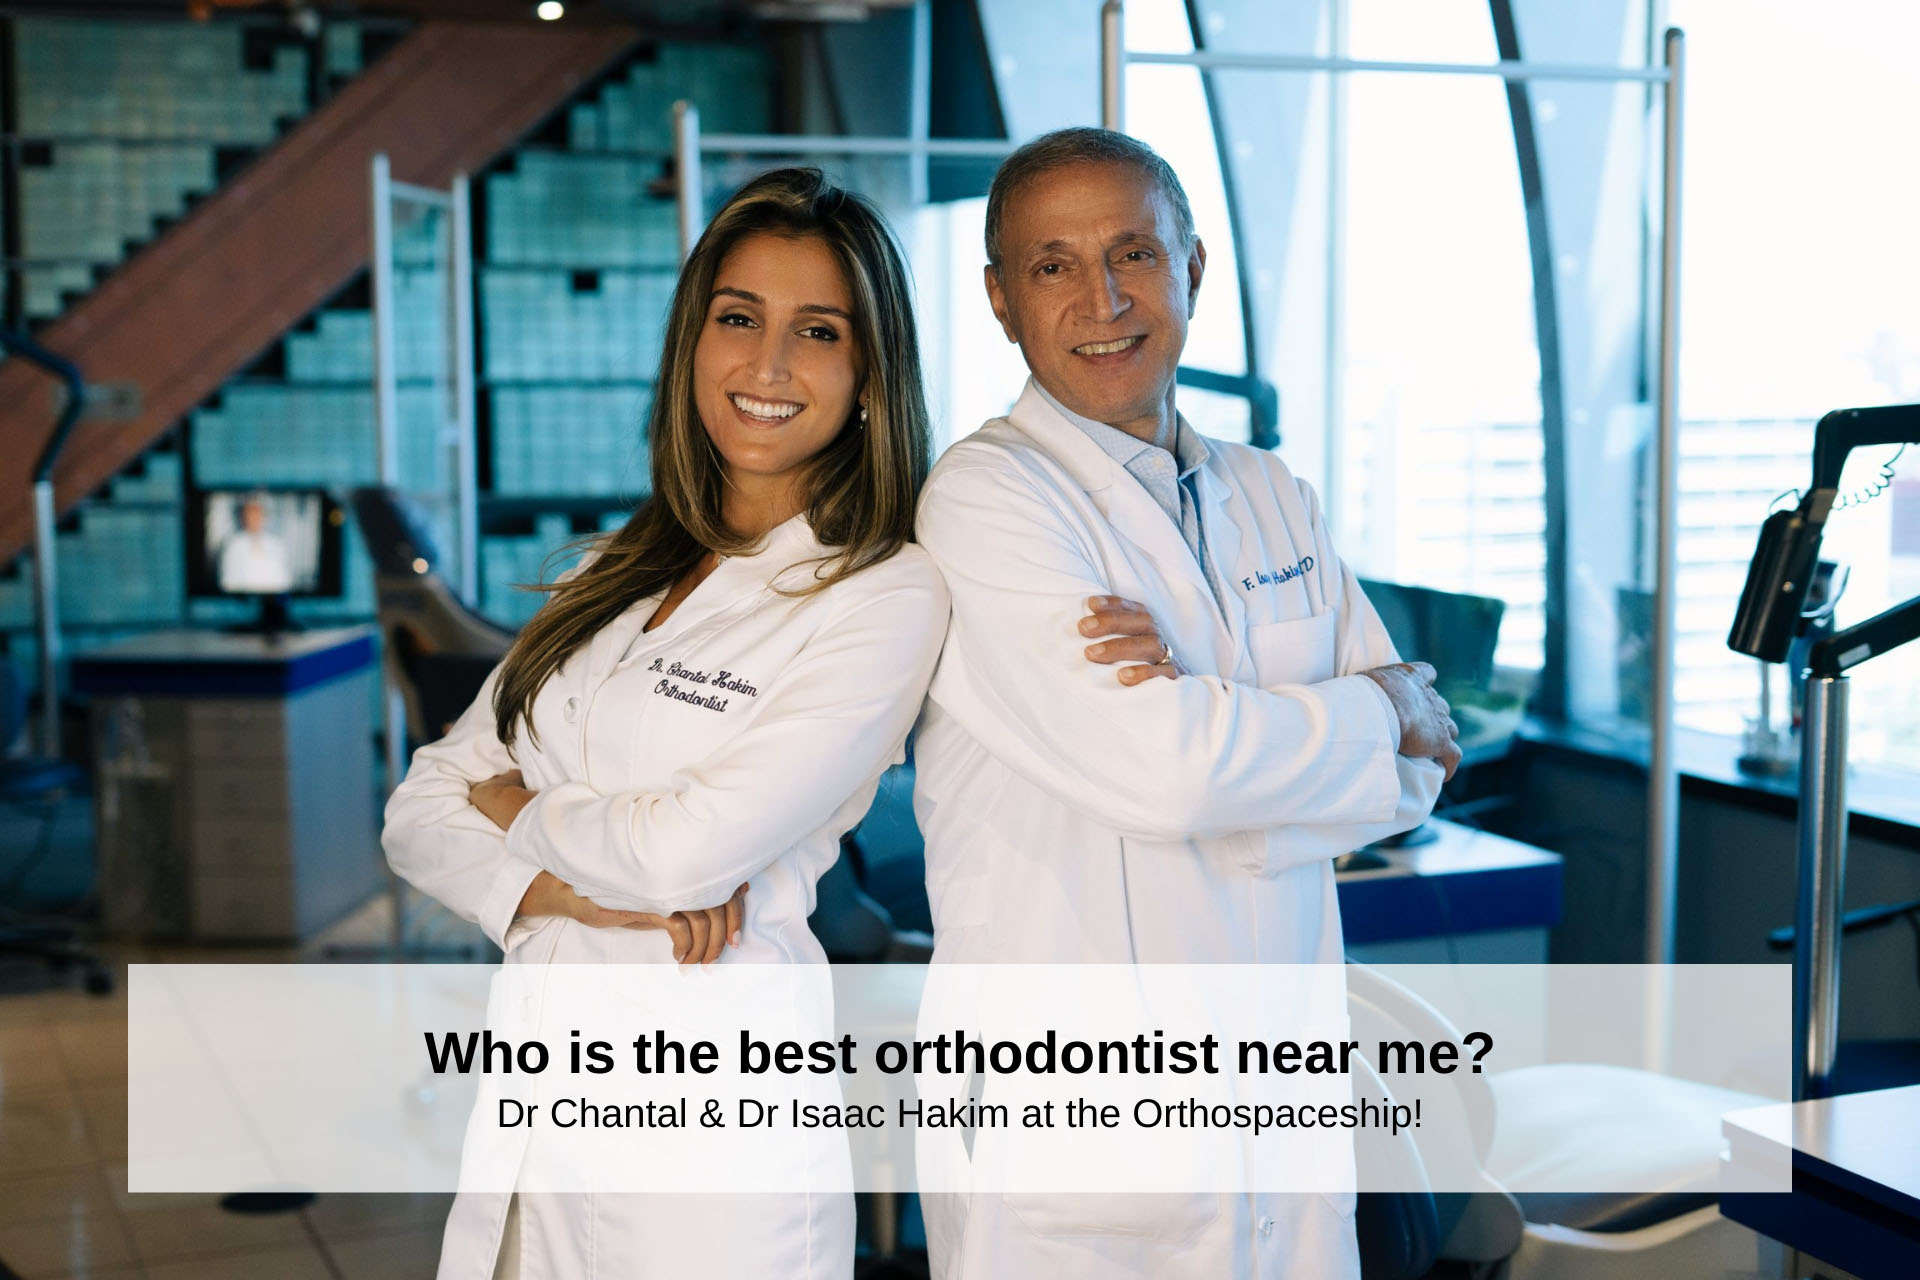 Dr. Chantal Hakim and Dr. Isaac Hakim of The Orthospacehip